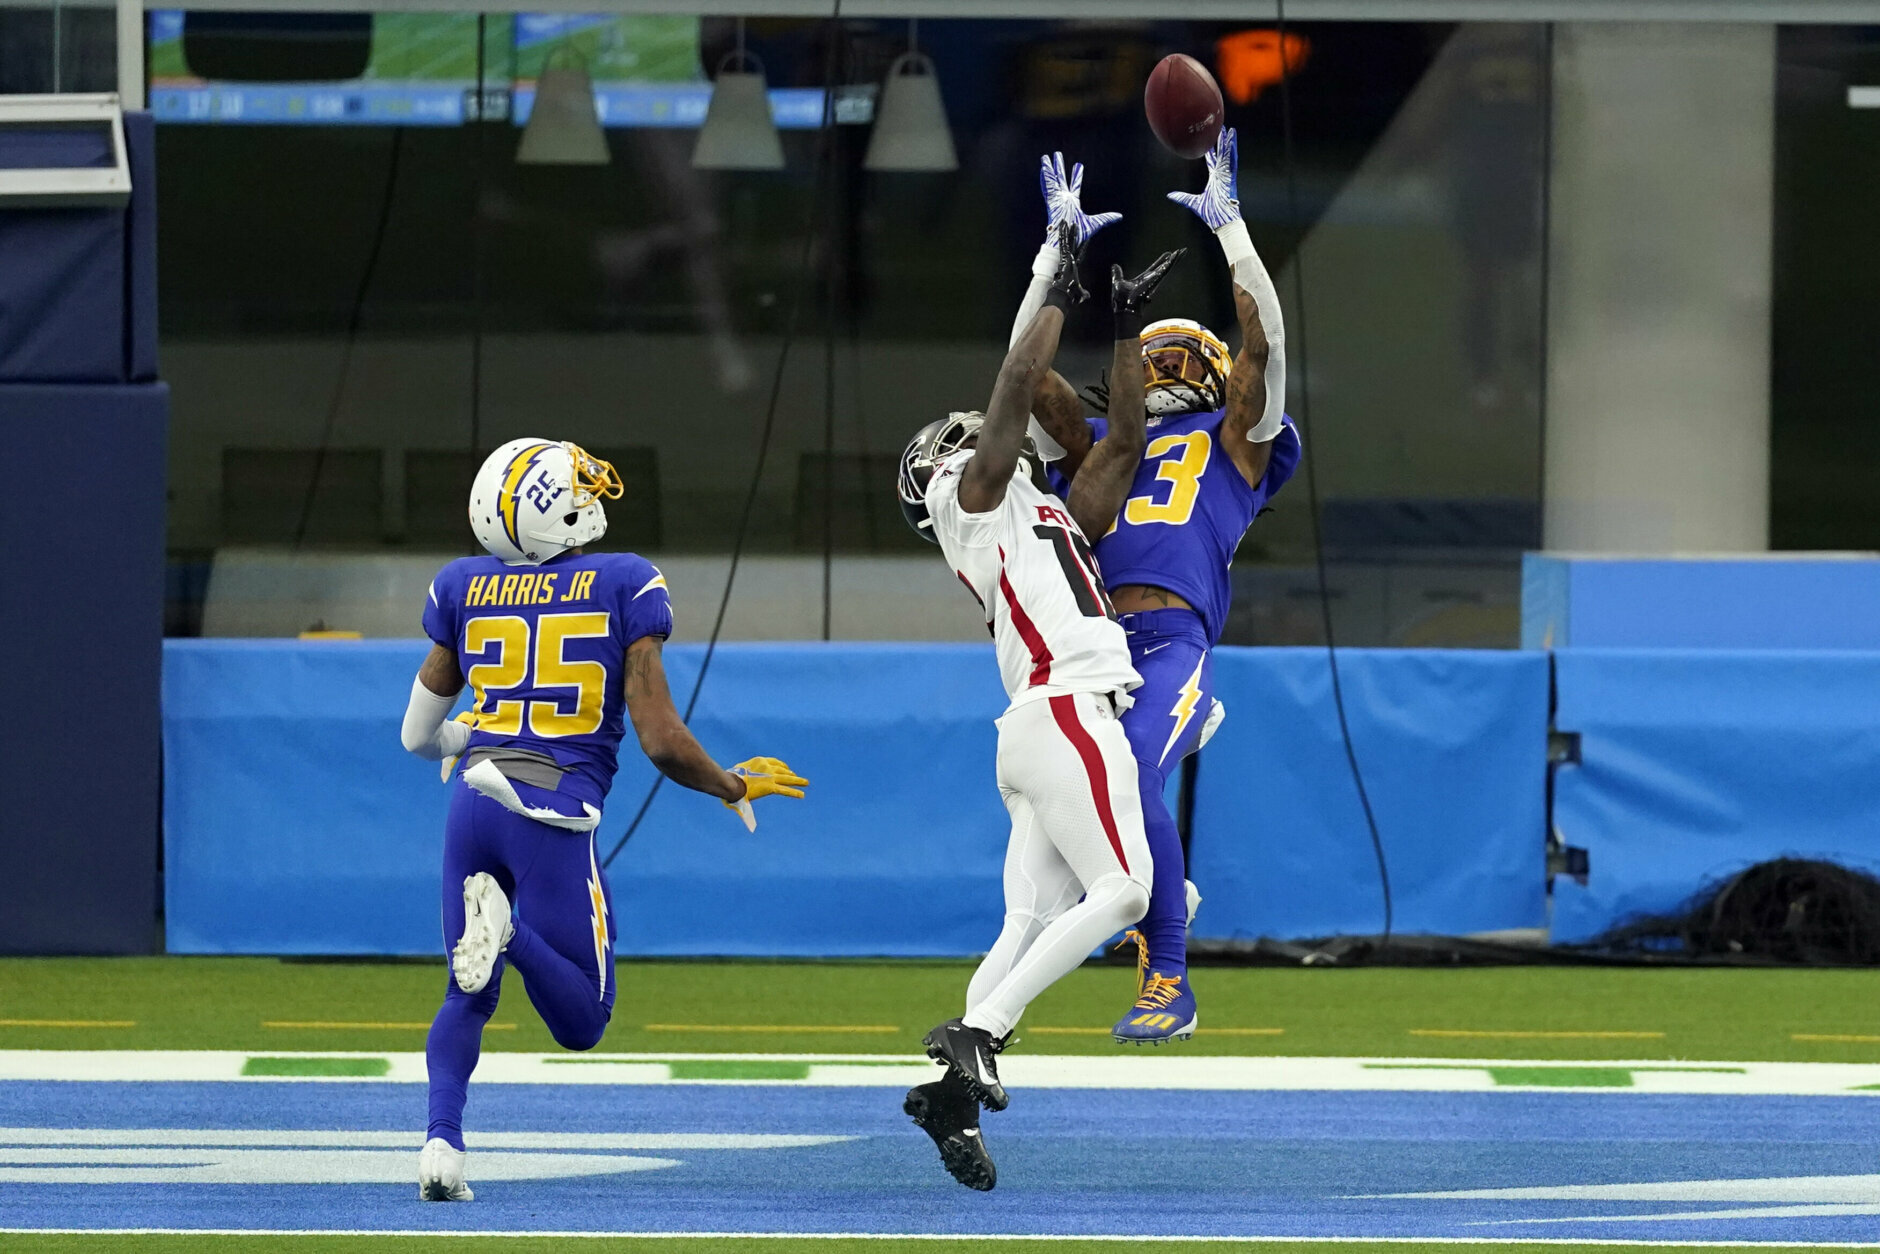 <p><b><i>Falcons 17</i></b><br />
<b><i>Chargers 20</i></b></p>
<p>At long last! <a href="https://wtop.com/gallery/nfl/2020-nfl-week-9-recap/" target="_blank" rel="noopener">I&#8217;ve been awaiting this meeting</a> between the two worst-luck franchises in the NFL, and this certainly didn&#8217;t disappoint. <a href="https://profootballtalk.nbcsports.com/2020/12/13/chargers-clock-management-costs-them-again-as-falcons-lead-17-10-at-halftime/" target="_blank" rel="noopener">The Chargers tried to blow it</a>, but the Falcons let &#8217;em off the hook by getting a better passing performance from receiver Russell Gage than their former MVP quarterback Matt Ryan. Both teams have earned their 4-9 records.</p>
